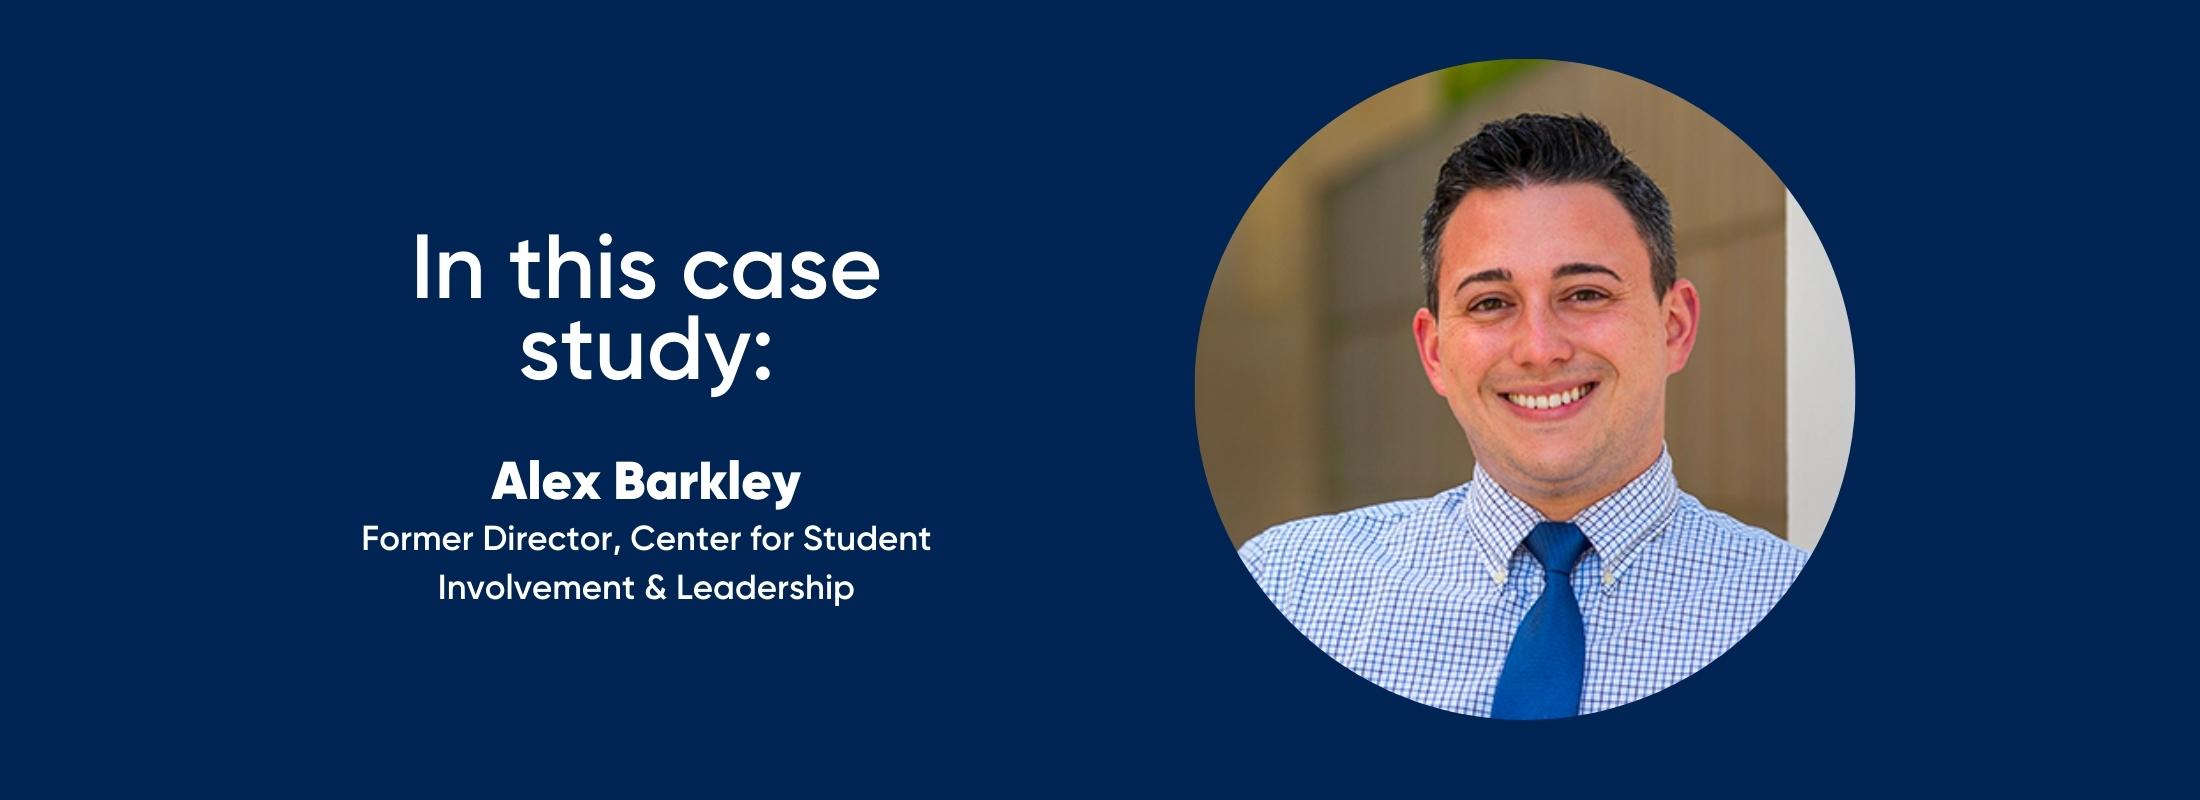 in this case study: Alex Barkley- Former Director, Center for Student Involvement & Leadership